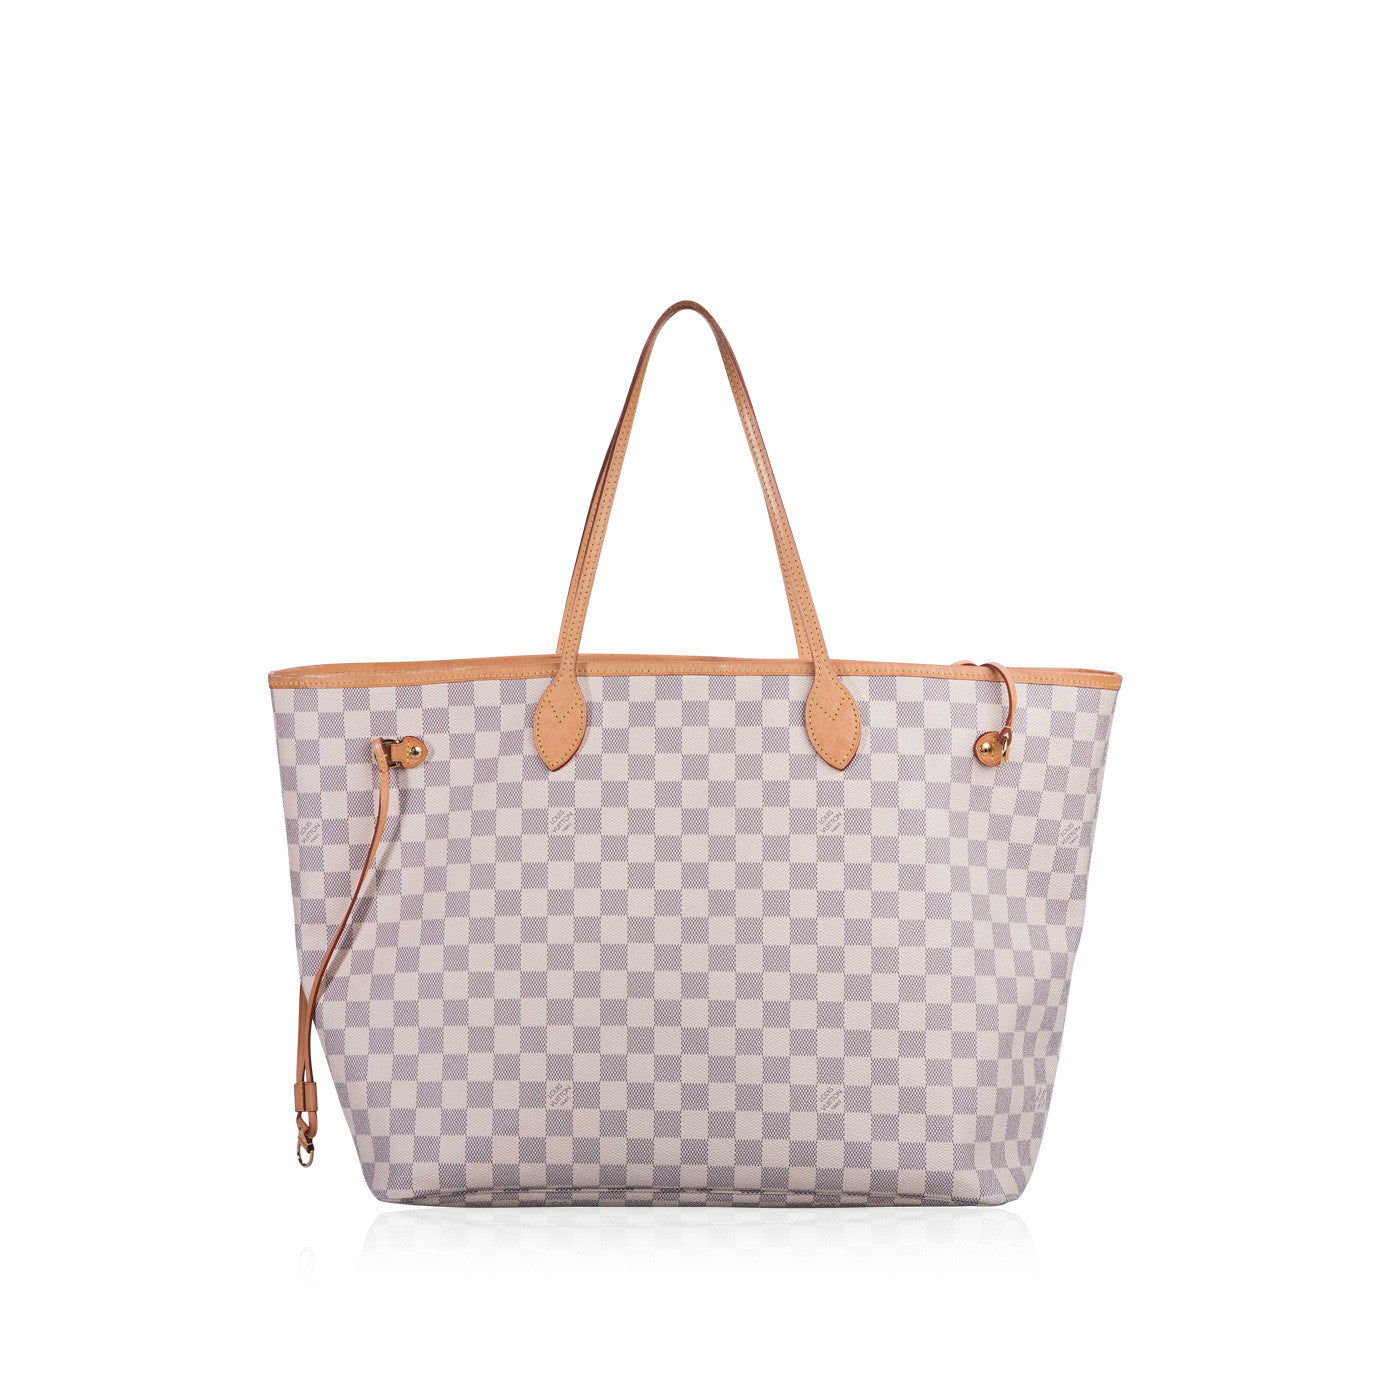 Louis Vuitton Neverfull Bag Gm Damier Azur Purse White Leather and